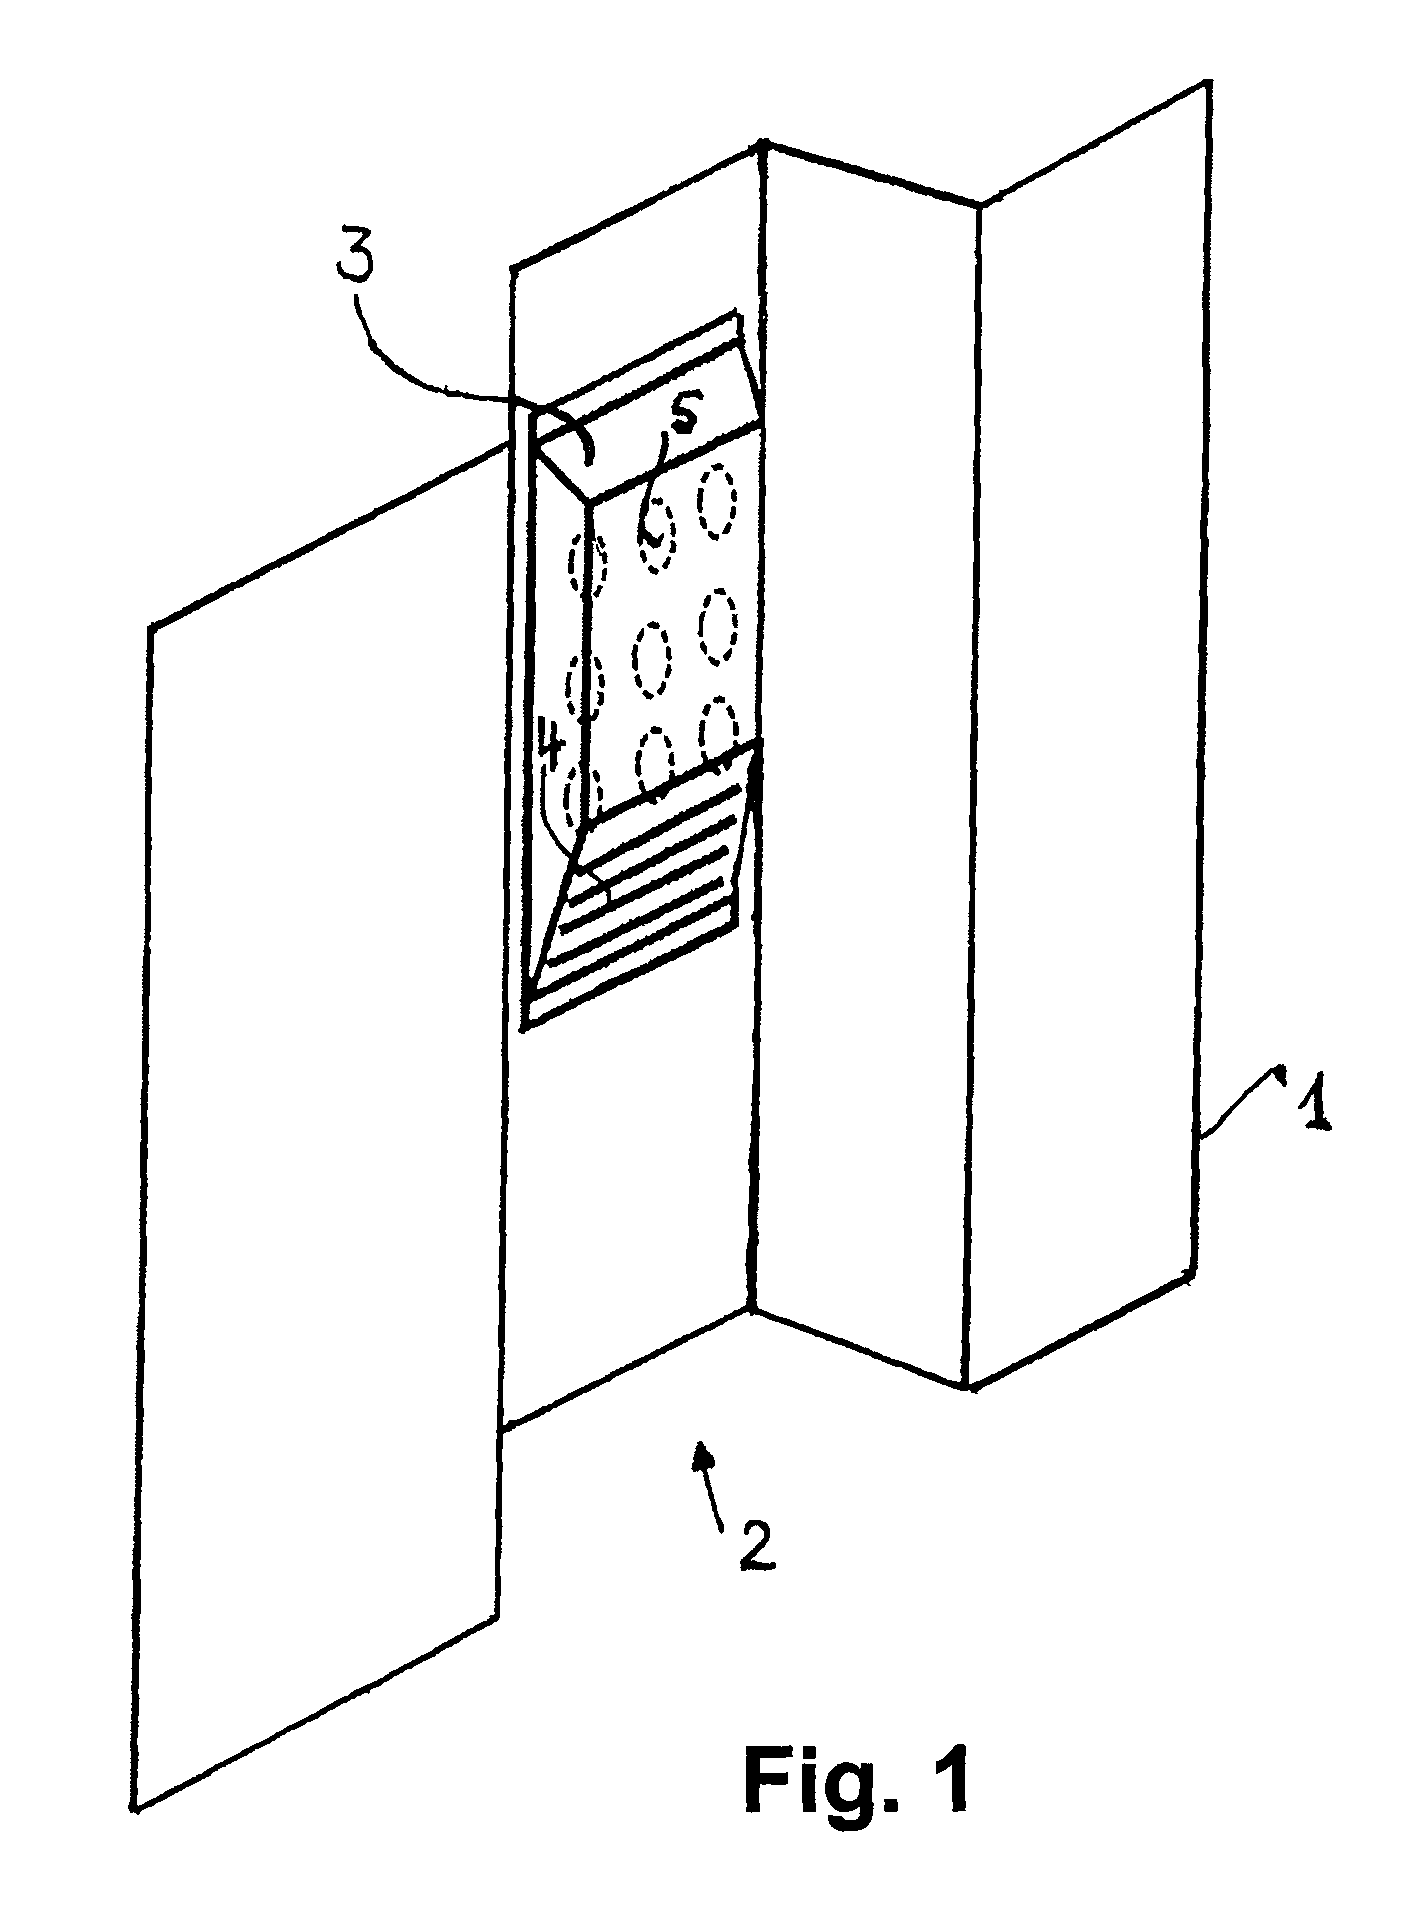 Arrangement of an antenna on a container